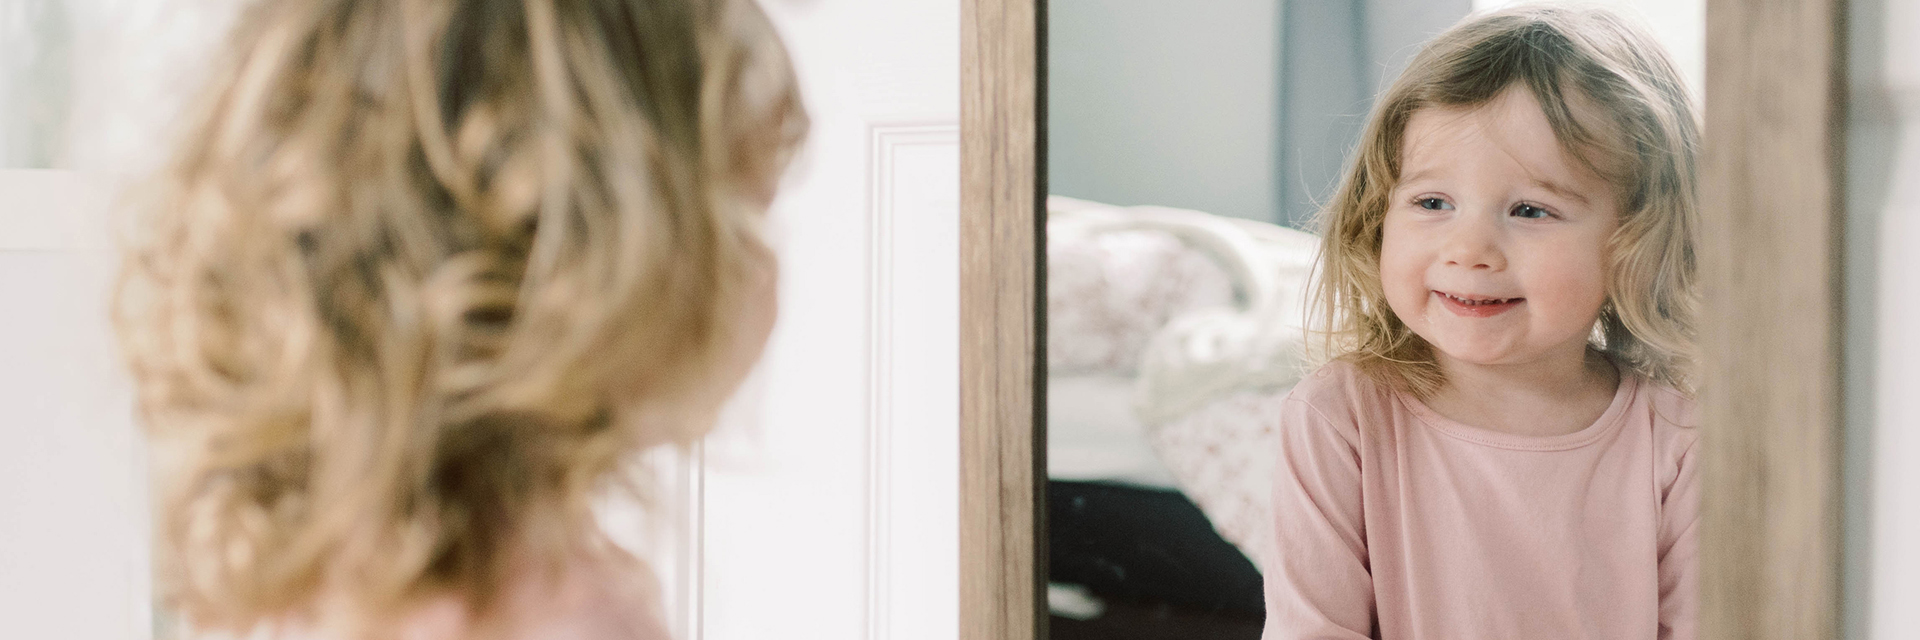 Little girl smiling at herself in mirror